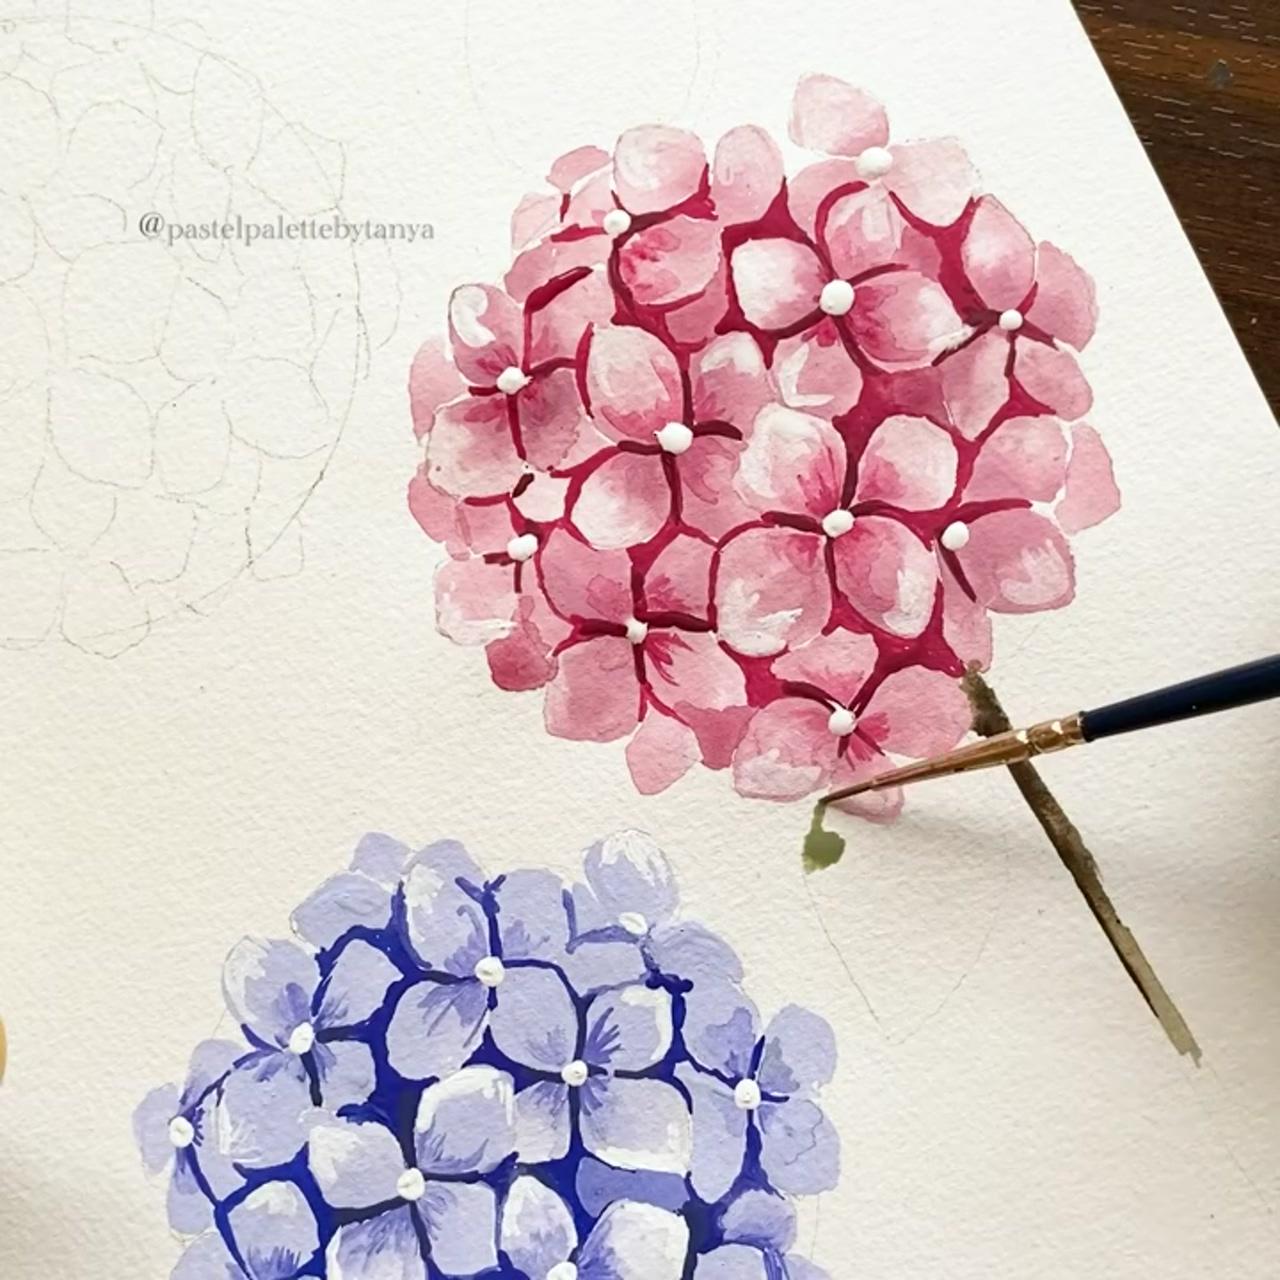 Painting a hydrangea flower; diy watercolor painting